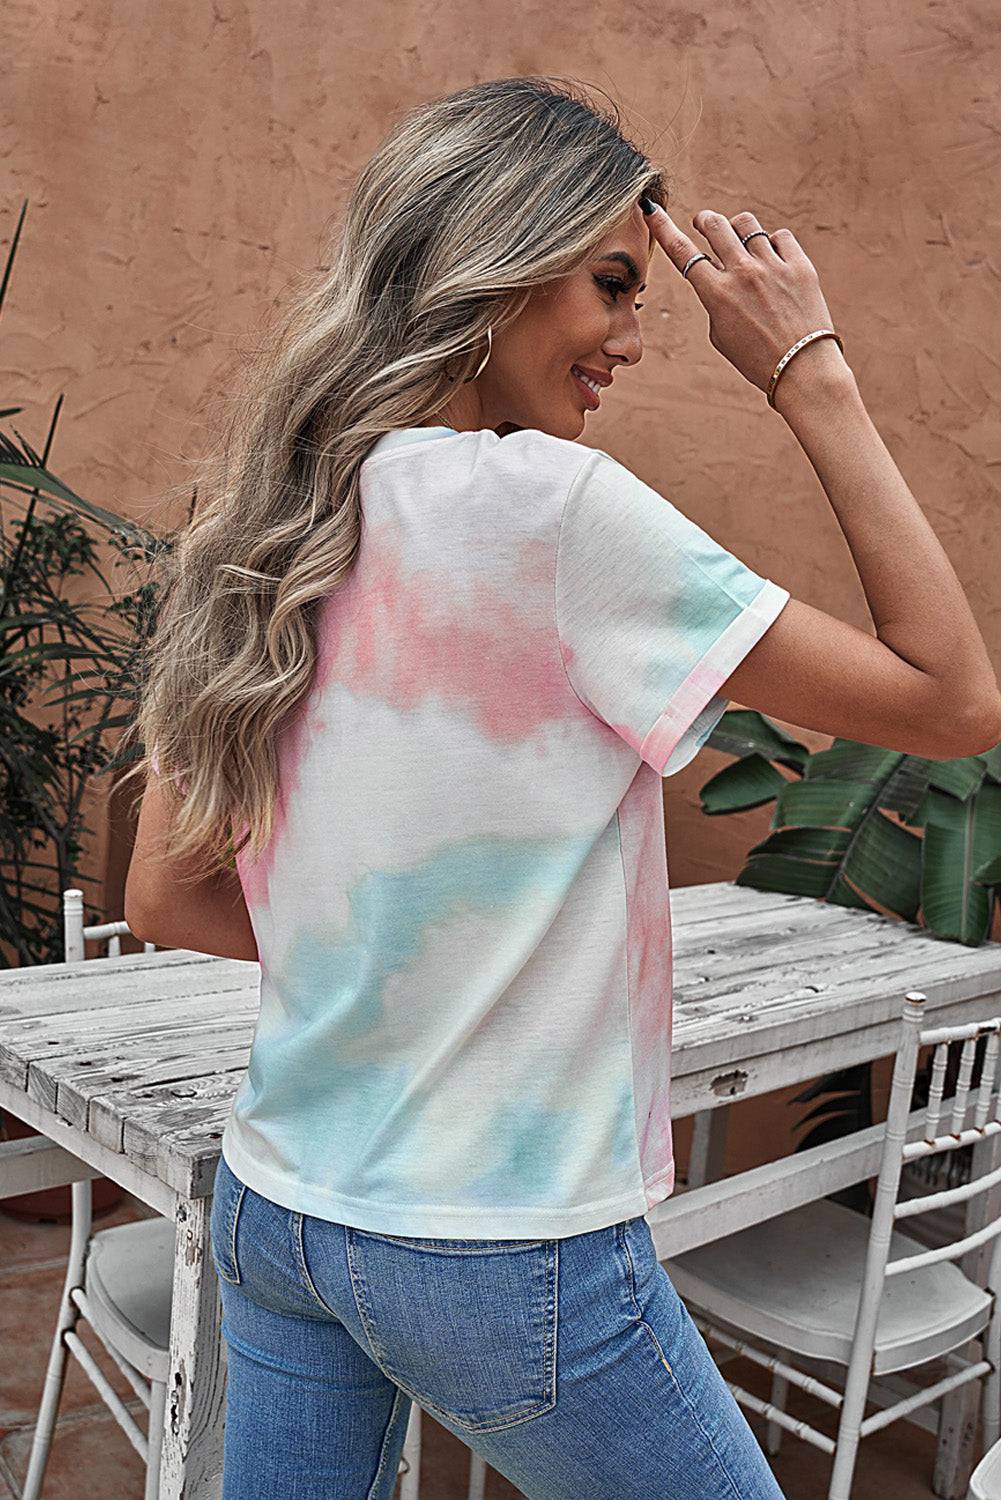 Tie-Dye Graphic Tee Shirt - Embrace the Spirit of Sweet Summer Days - Let Your Carefree Soul Shine - Guy Christopher 